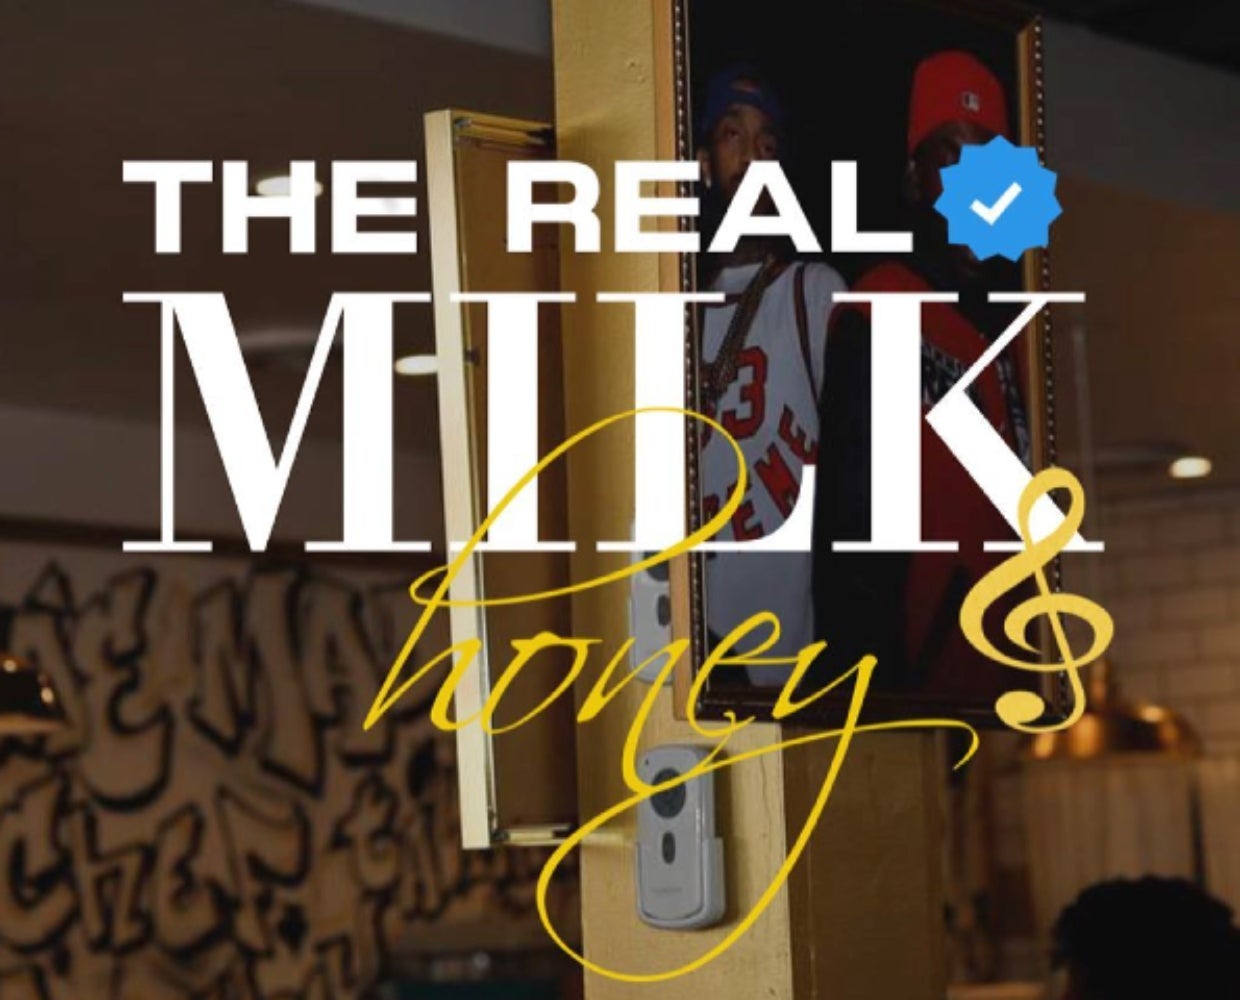 Op-Ed: In Defense Of Atlanta’s The Real Milk & Honey, Black Establishments Should Be Allowed To Have An Off Day